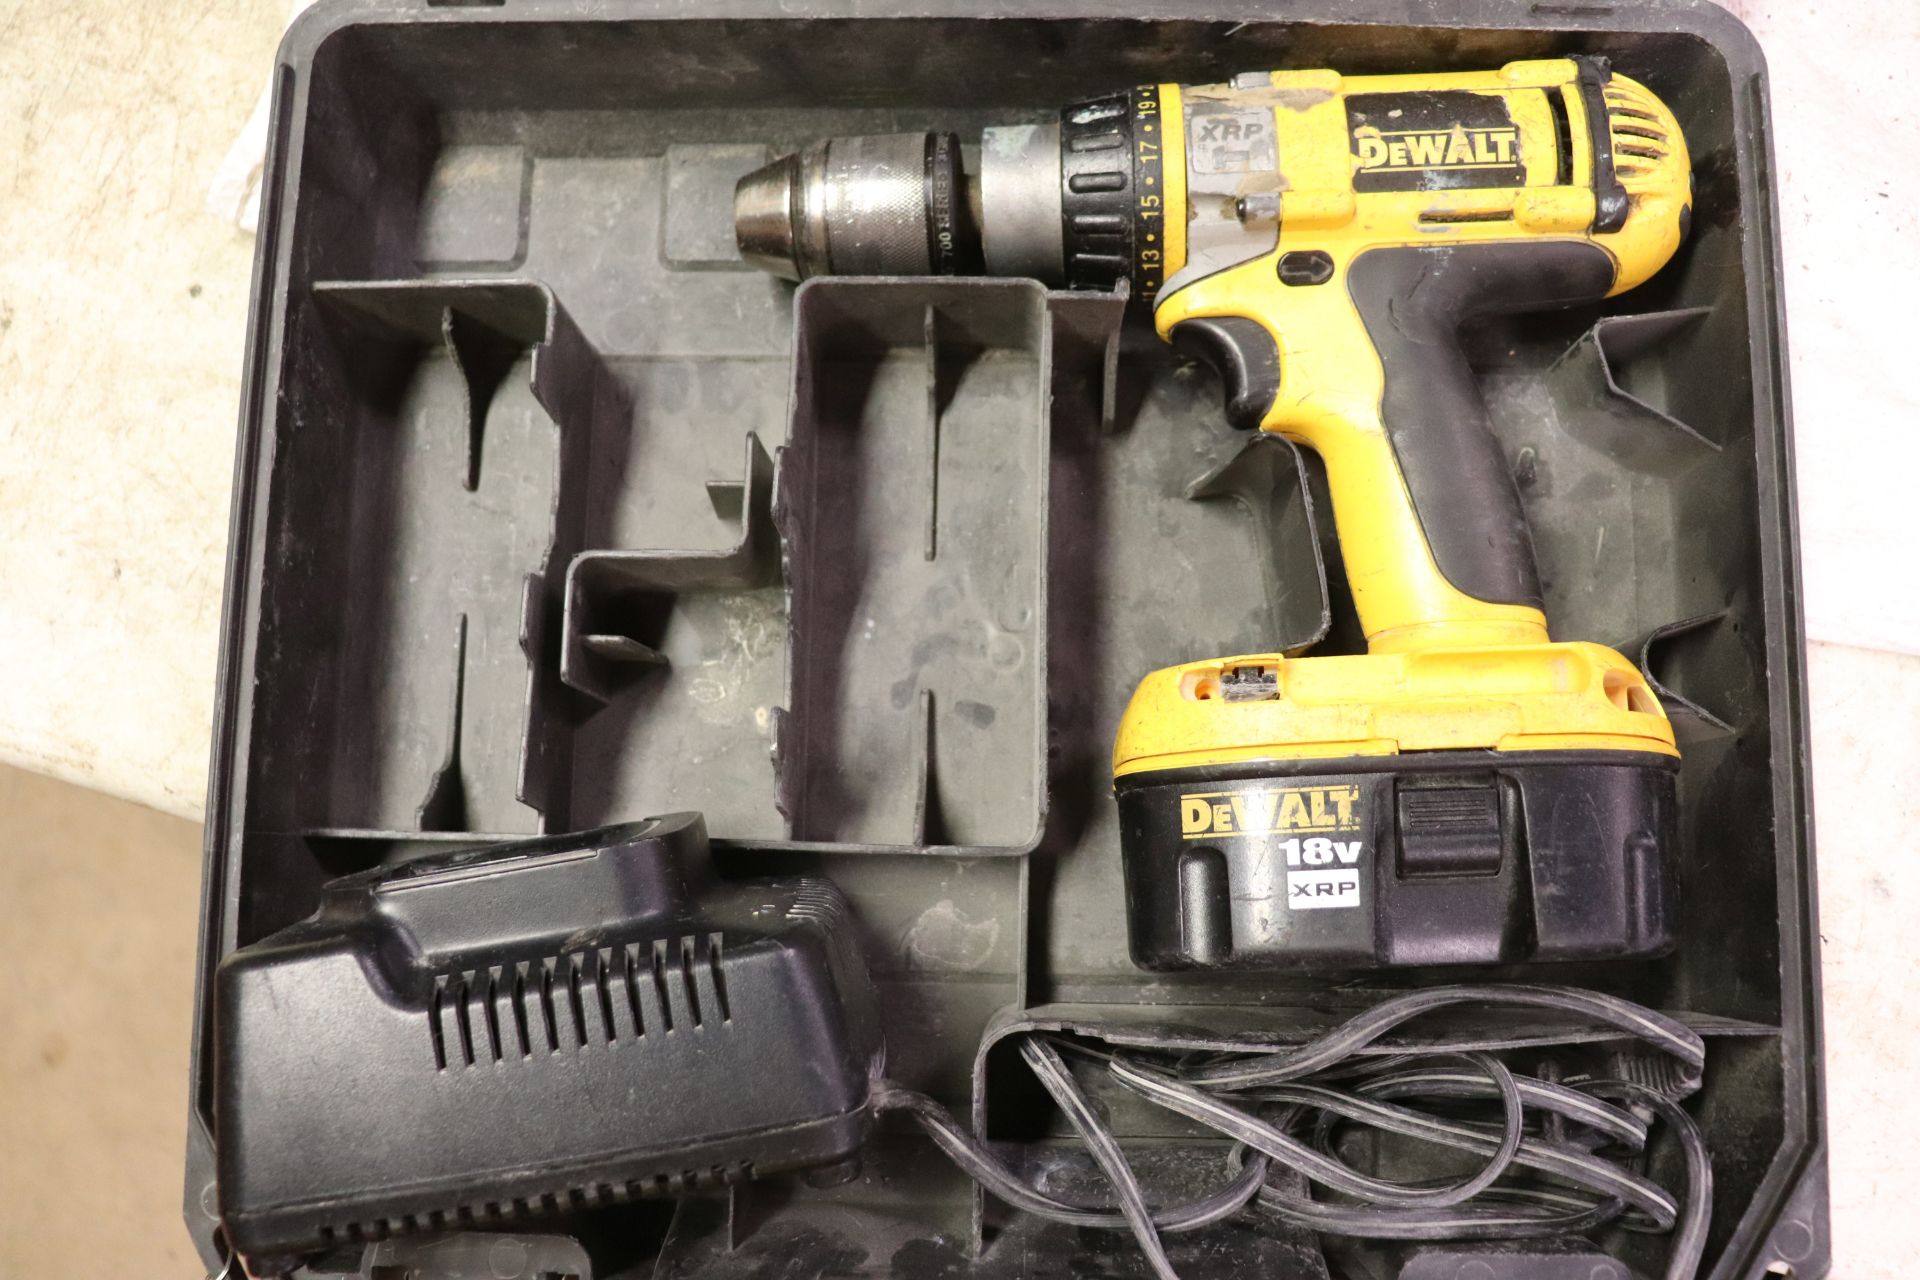 Dewalt 1/2" cordless hammer drill, DC988, with battery, charger and case